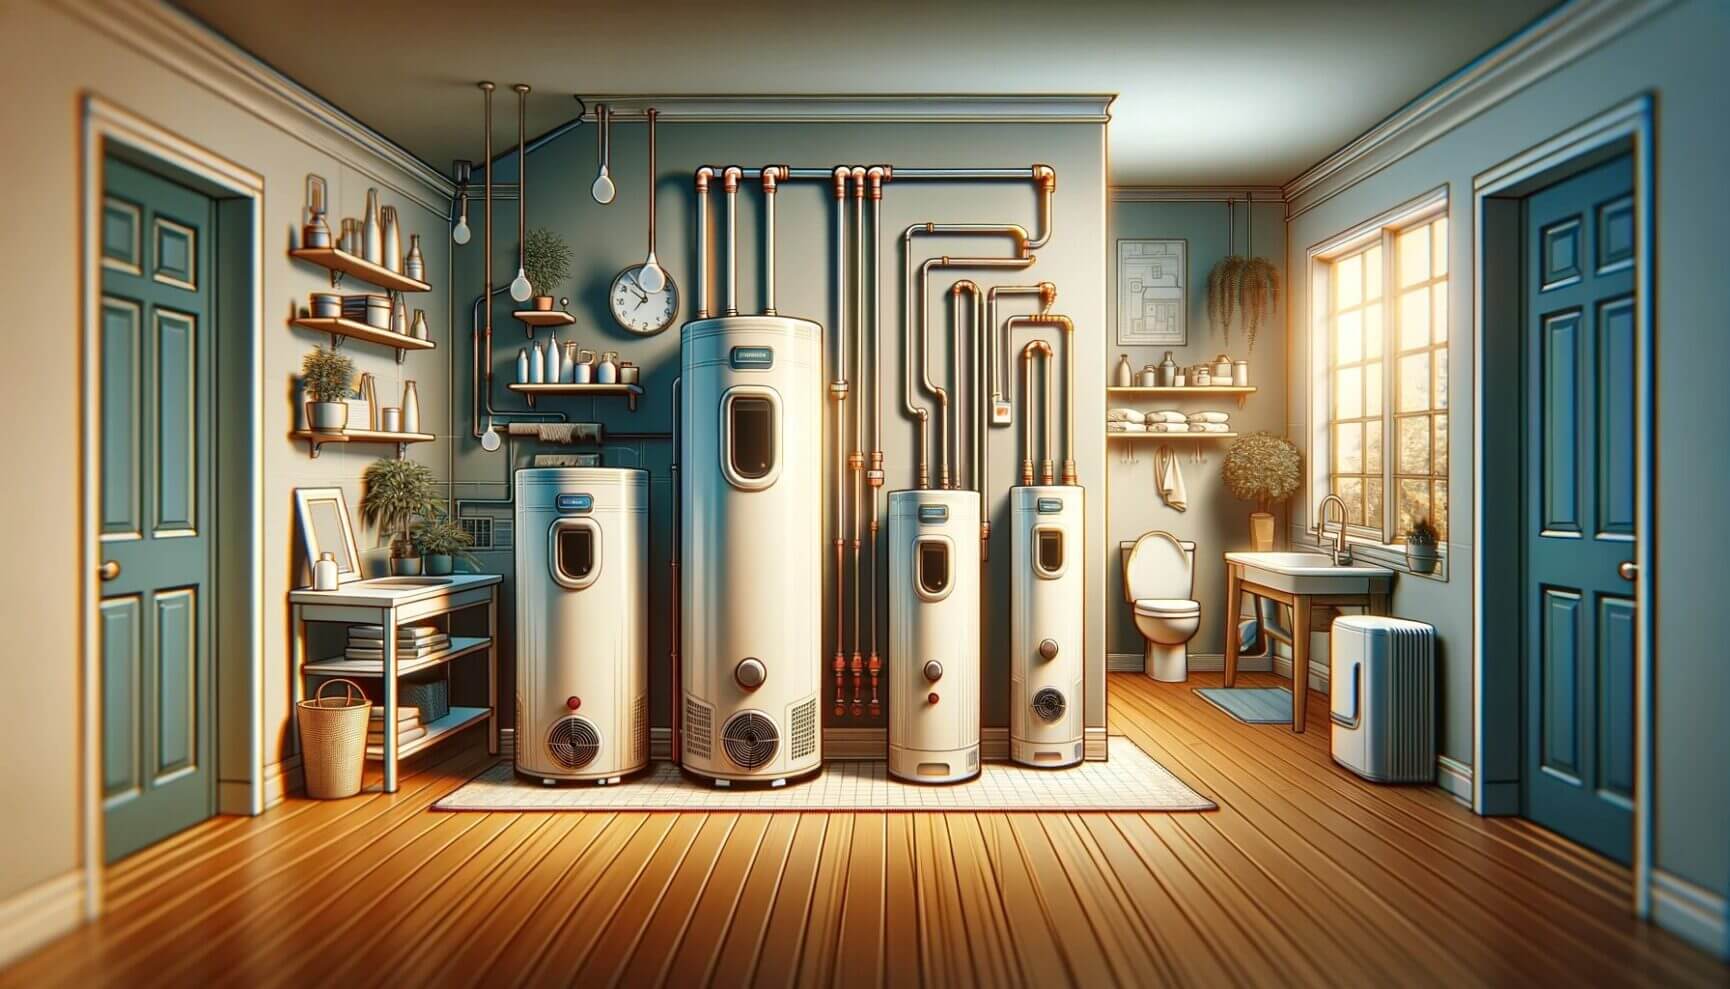 A room with several water heaters in it.